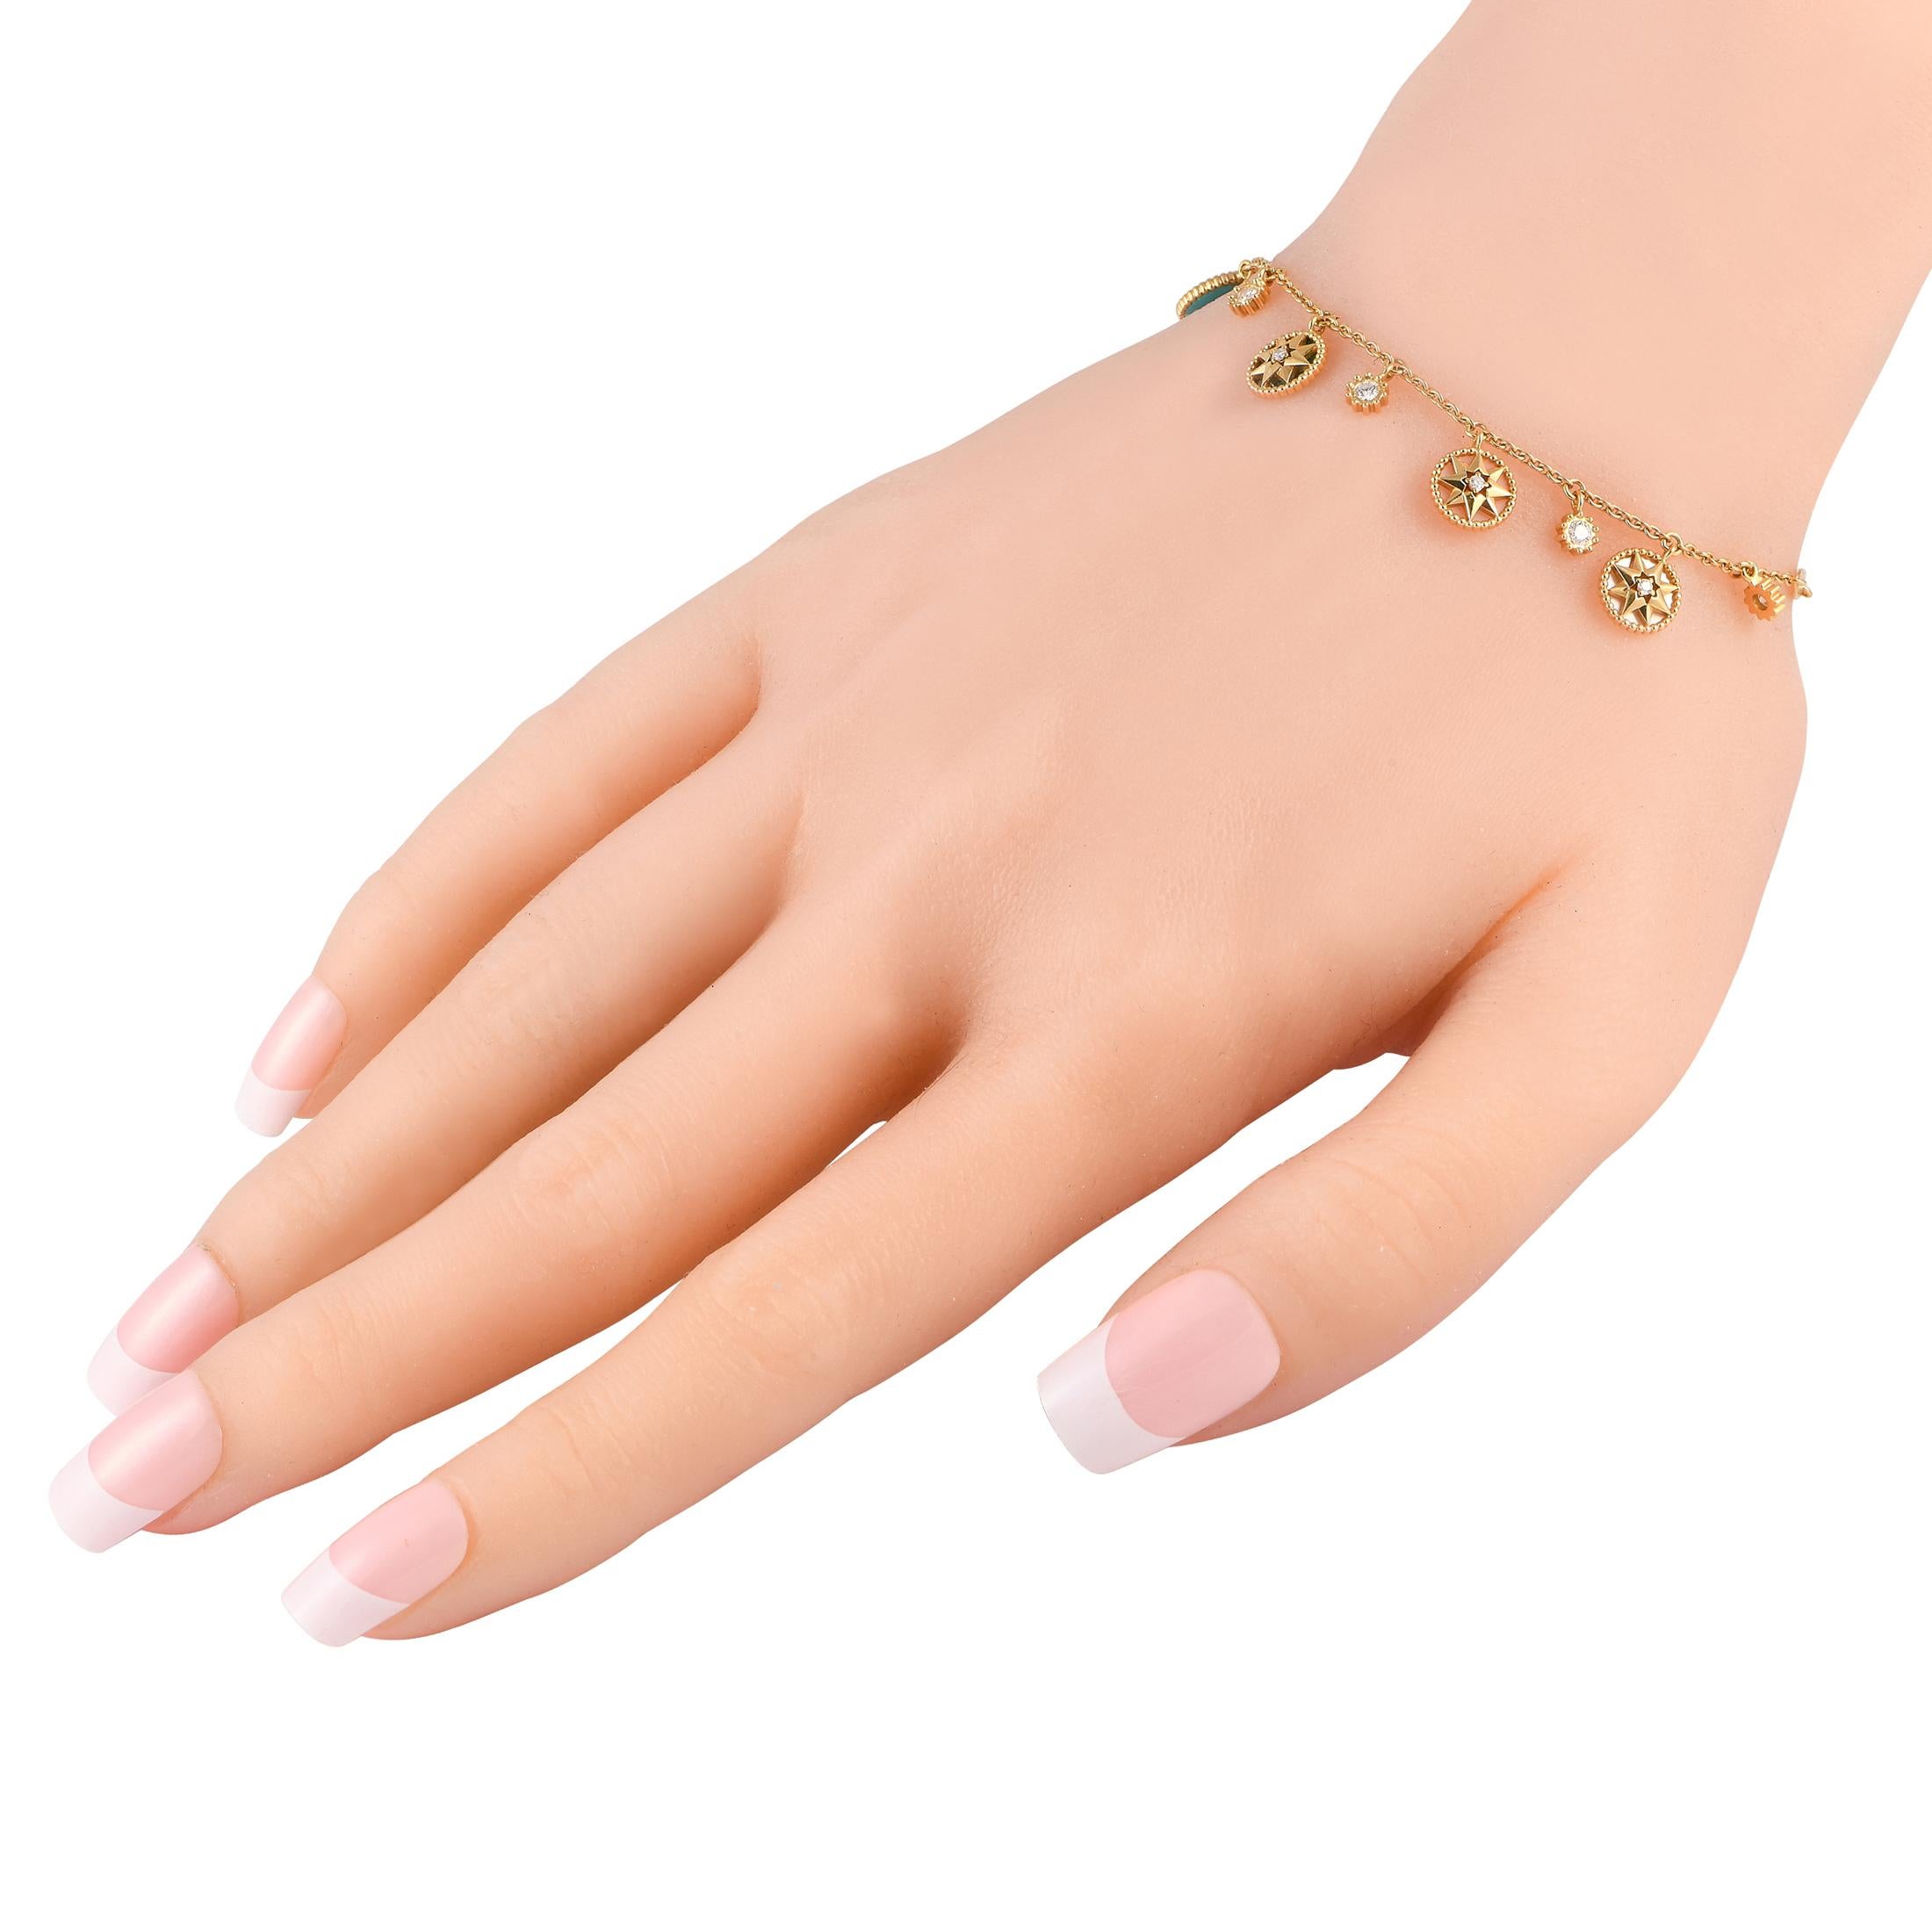 A series of emblematic charms hand delicately from a 6.75 long chain on this delicate Dior Rose des Vents bracelet. Elevated by colorful ornamental stones and shimmering Diamond accents, this exquisite accessory comes complete with secure lobster